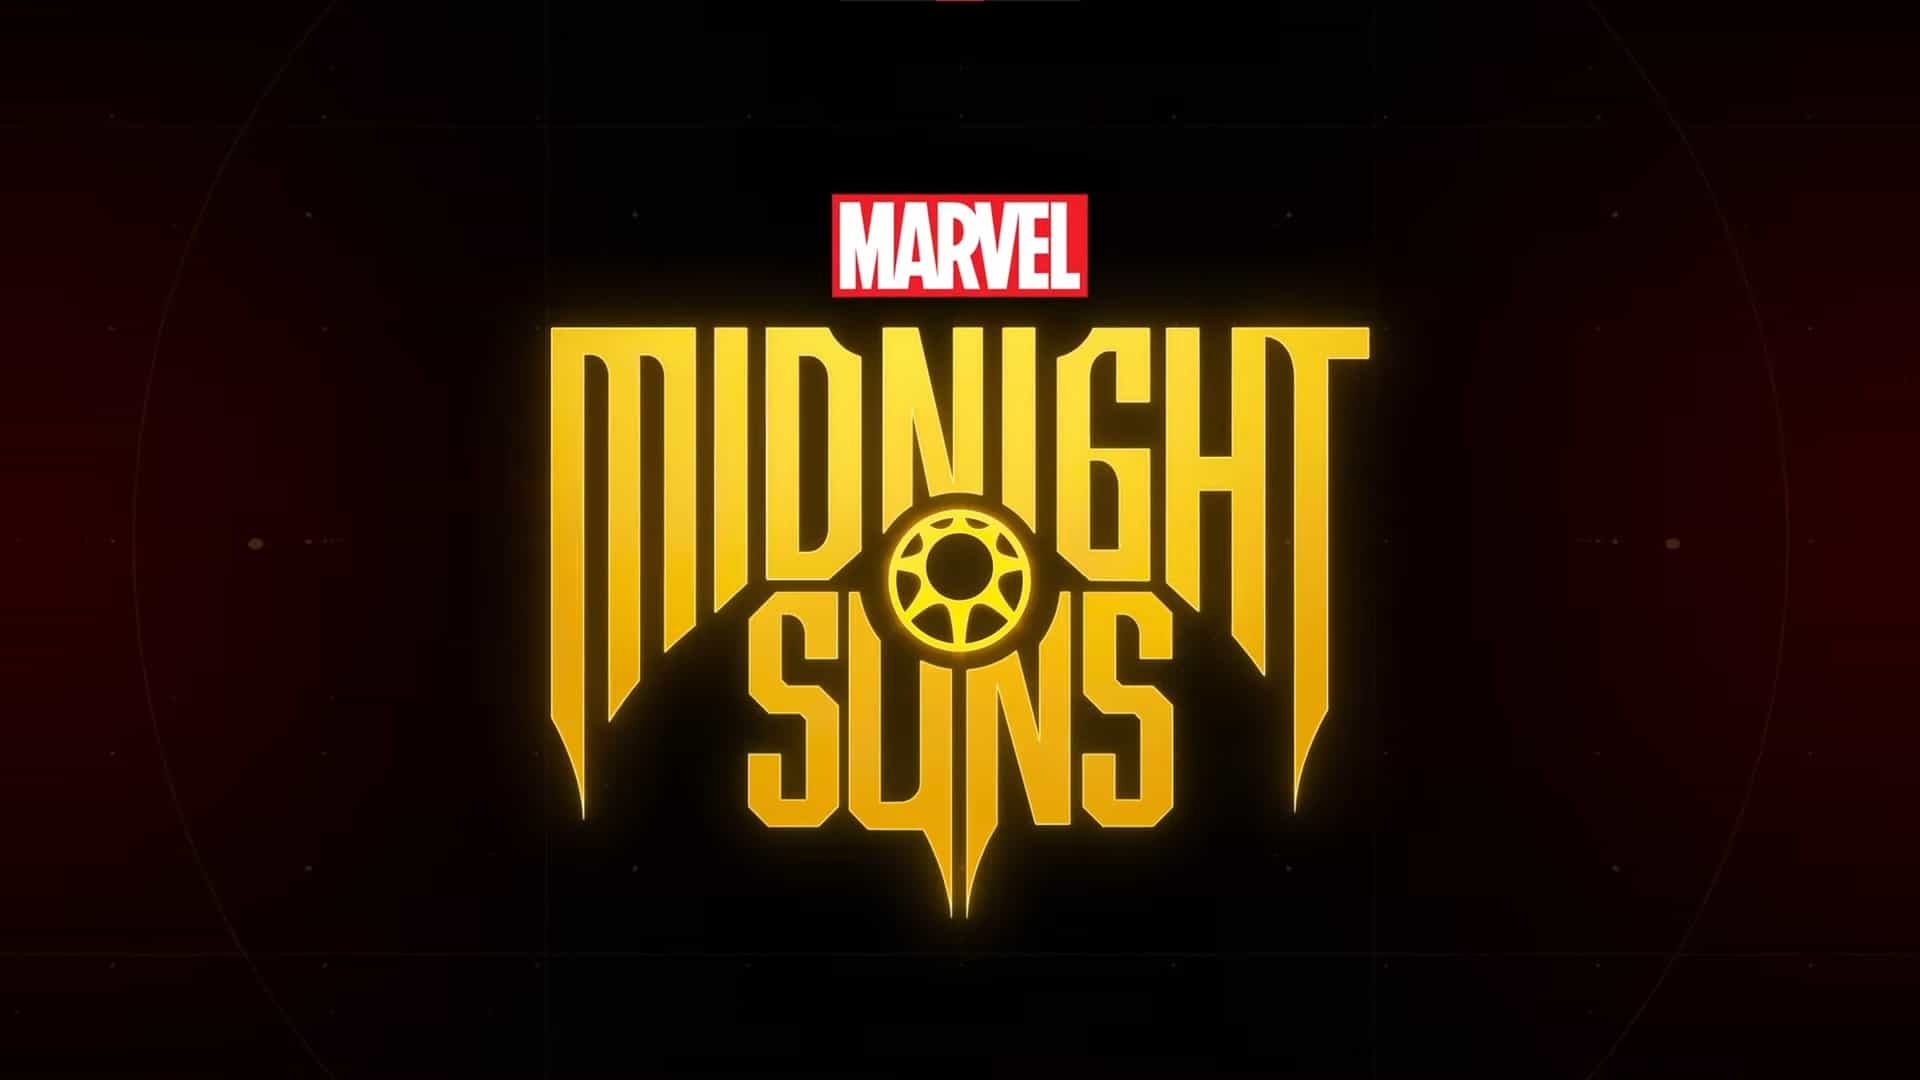 Marvel's Midnight Suns is Firaxis New Tactical RPG Launching March 2022